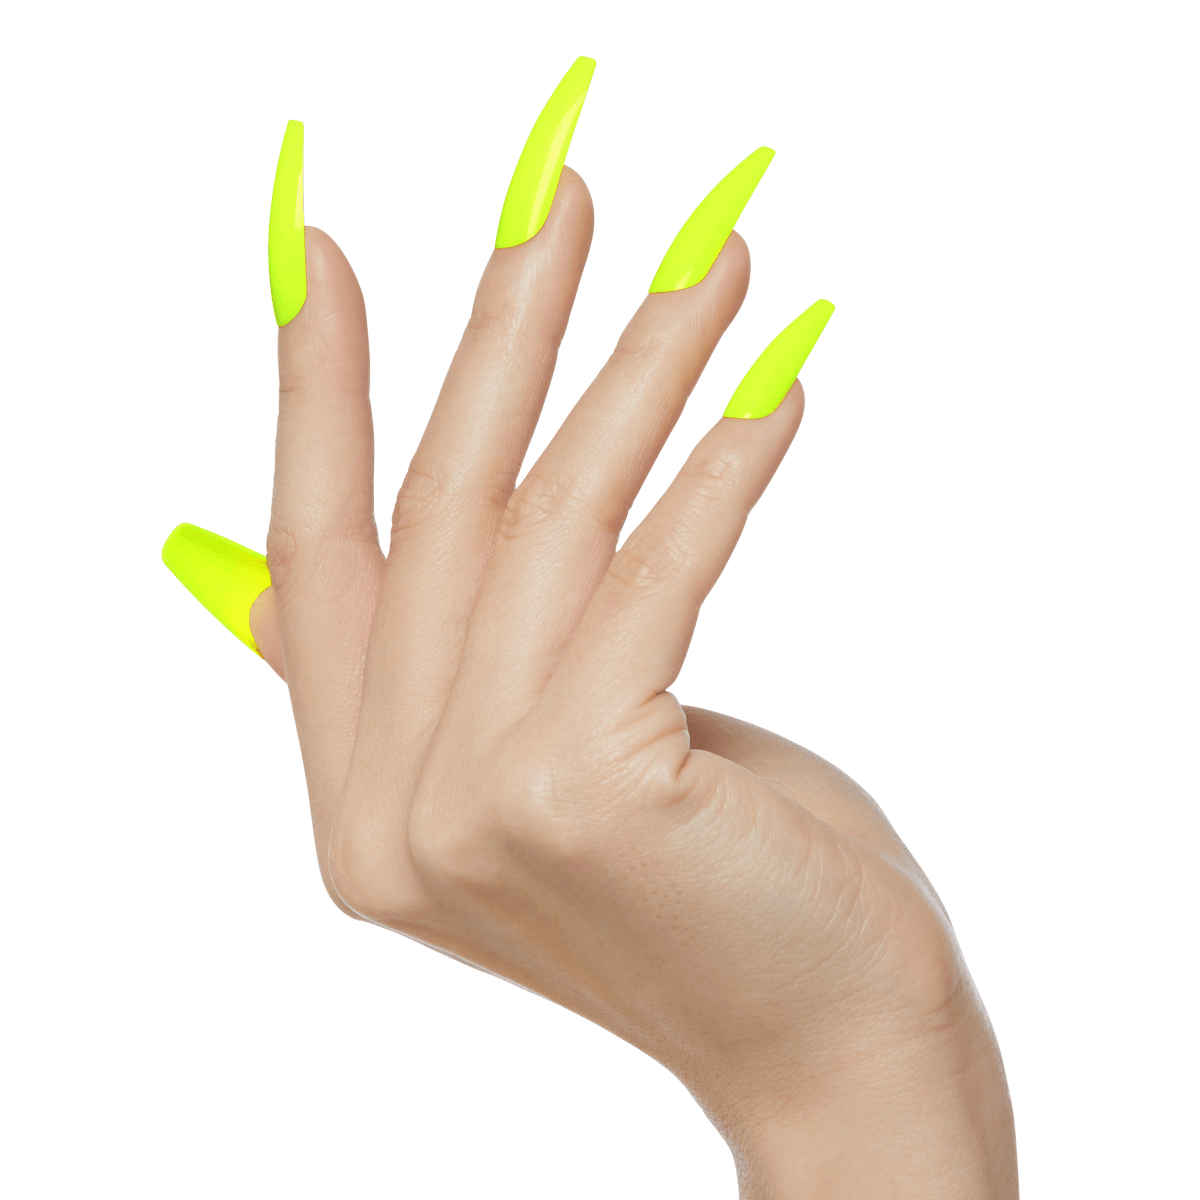 Buy Secret Lives designer artificial nails extension long light yellow &  translucent bottom with stud design 24 pieces set with manicure kit  convenient than manicure Online at Low Prices in India -